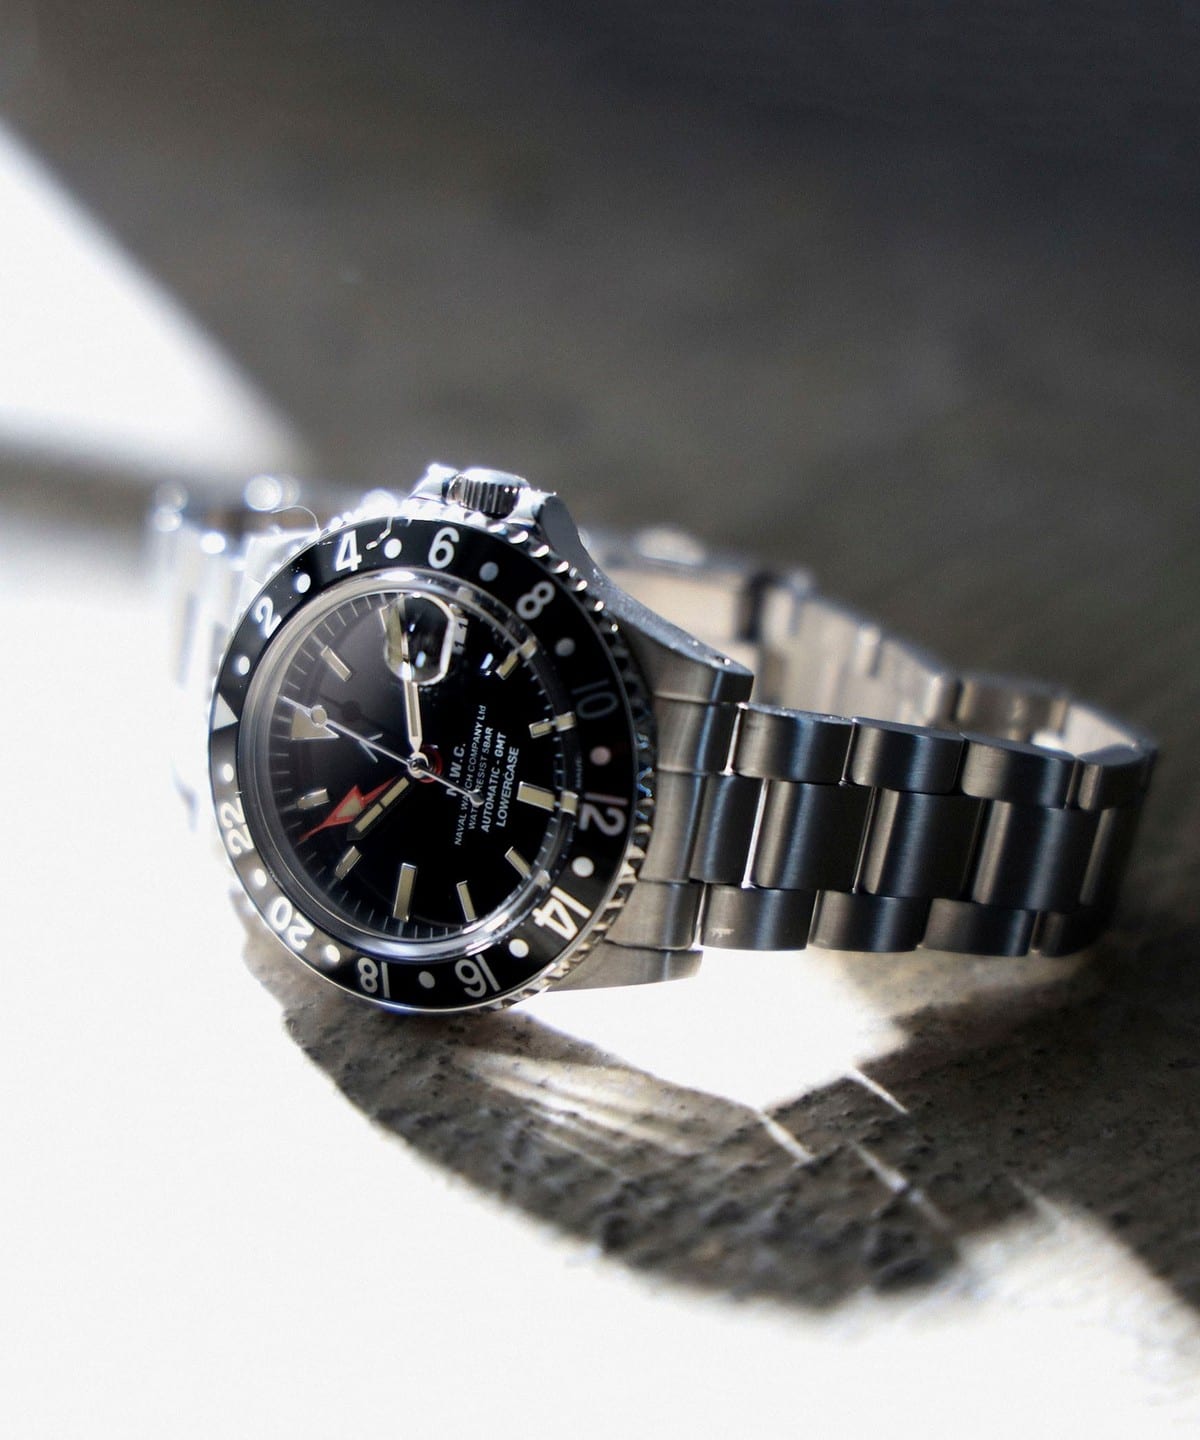 NAVAL WATCH由 LOWERCASE 生产 / FRXD GMT EXCLUSIVE